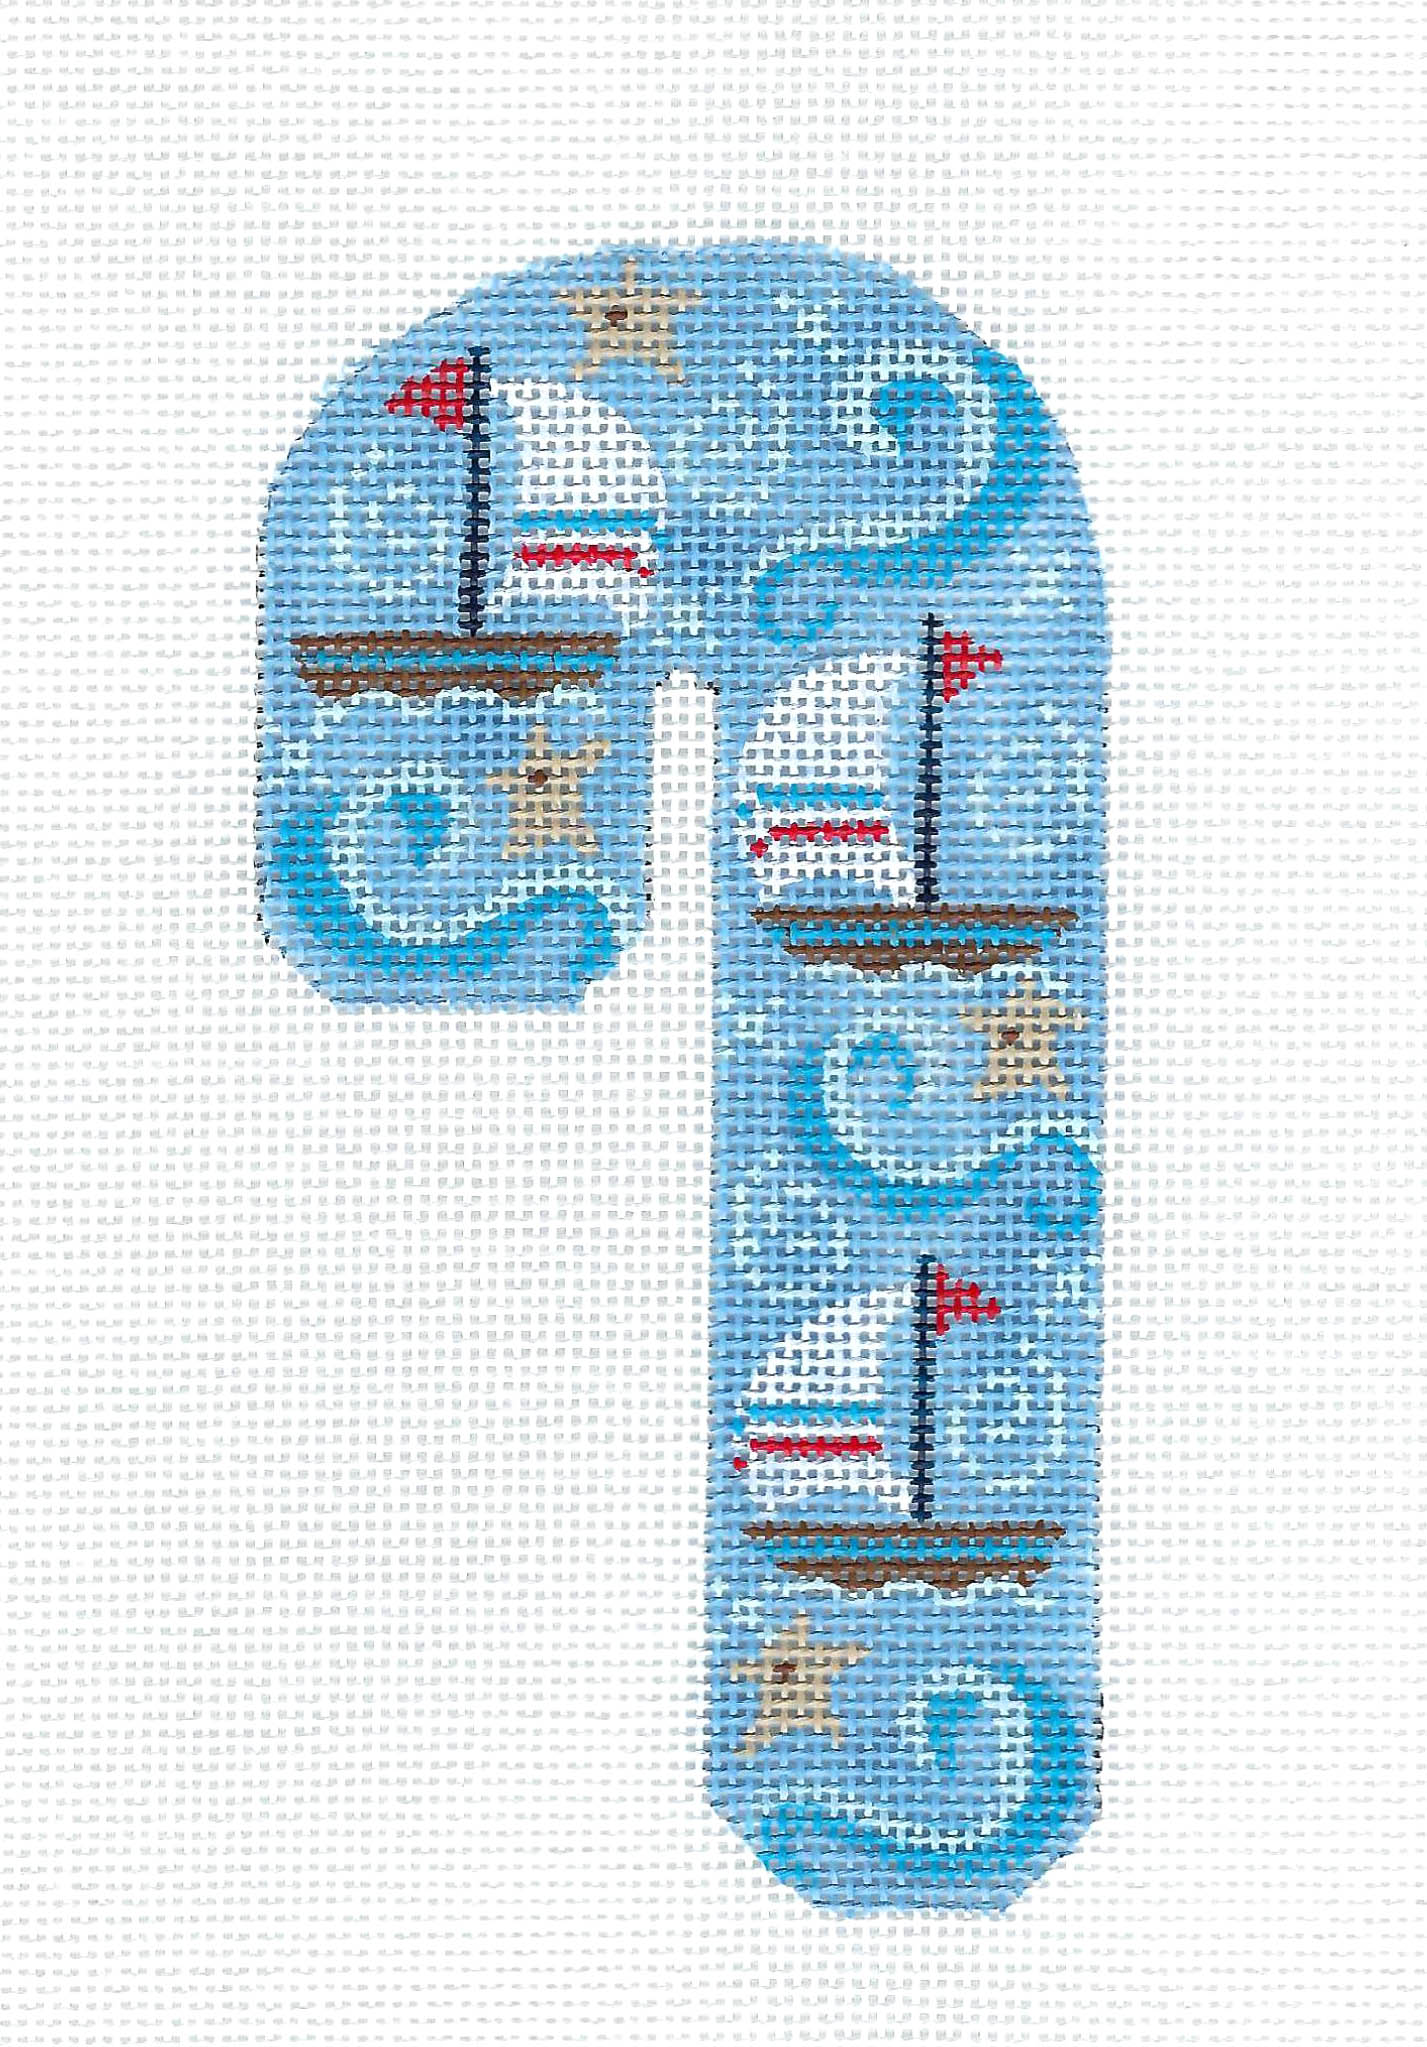 Candy Cane ~ Sailboats Sailing MED. Candy Cane on hand painted Needlepoint canvas by CH Designs ~ Danji